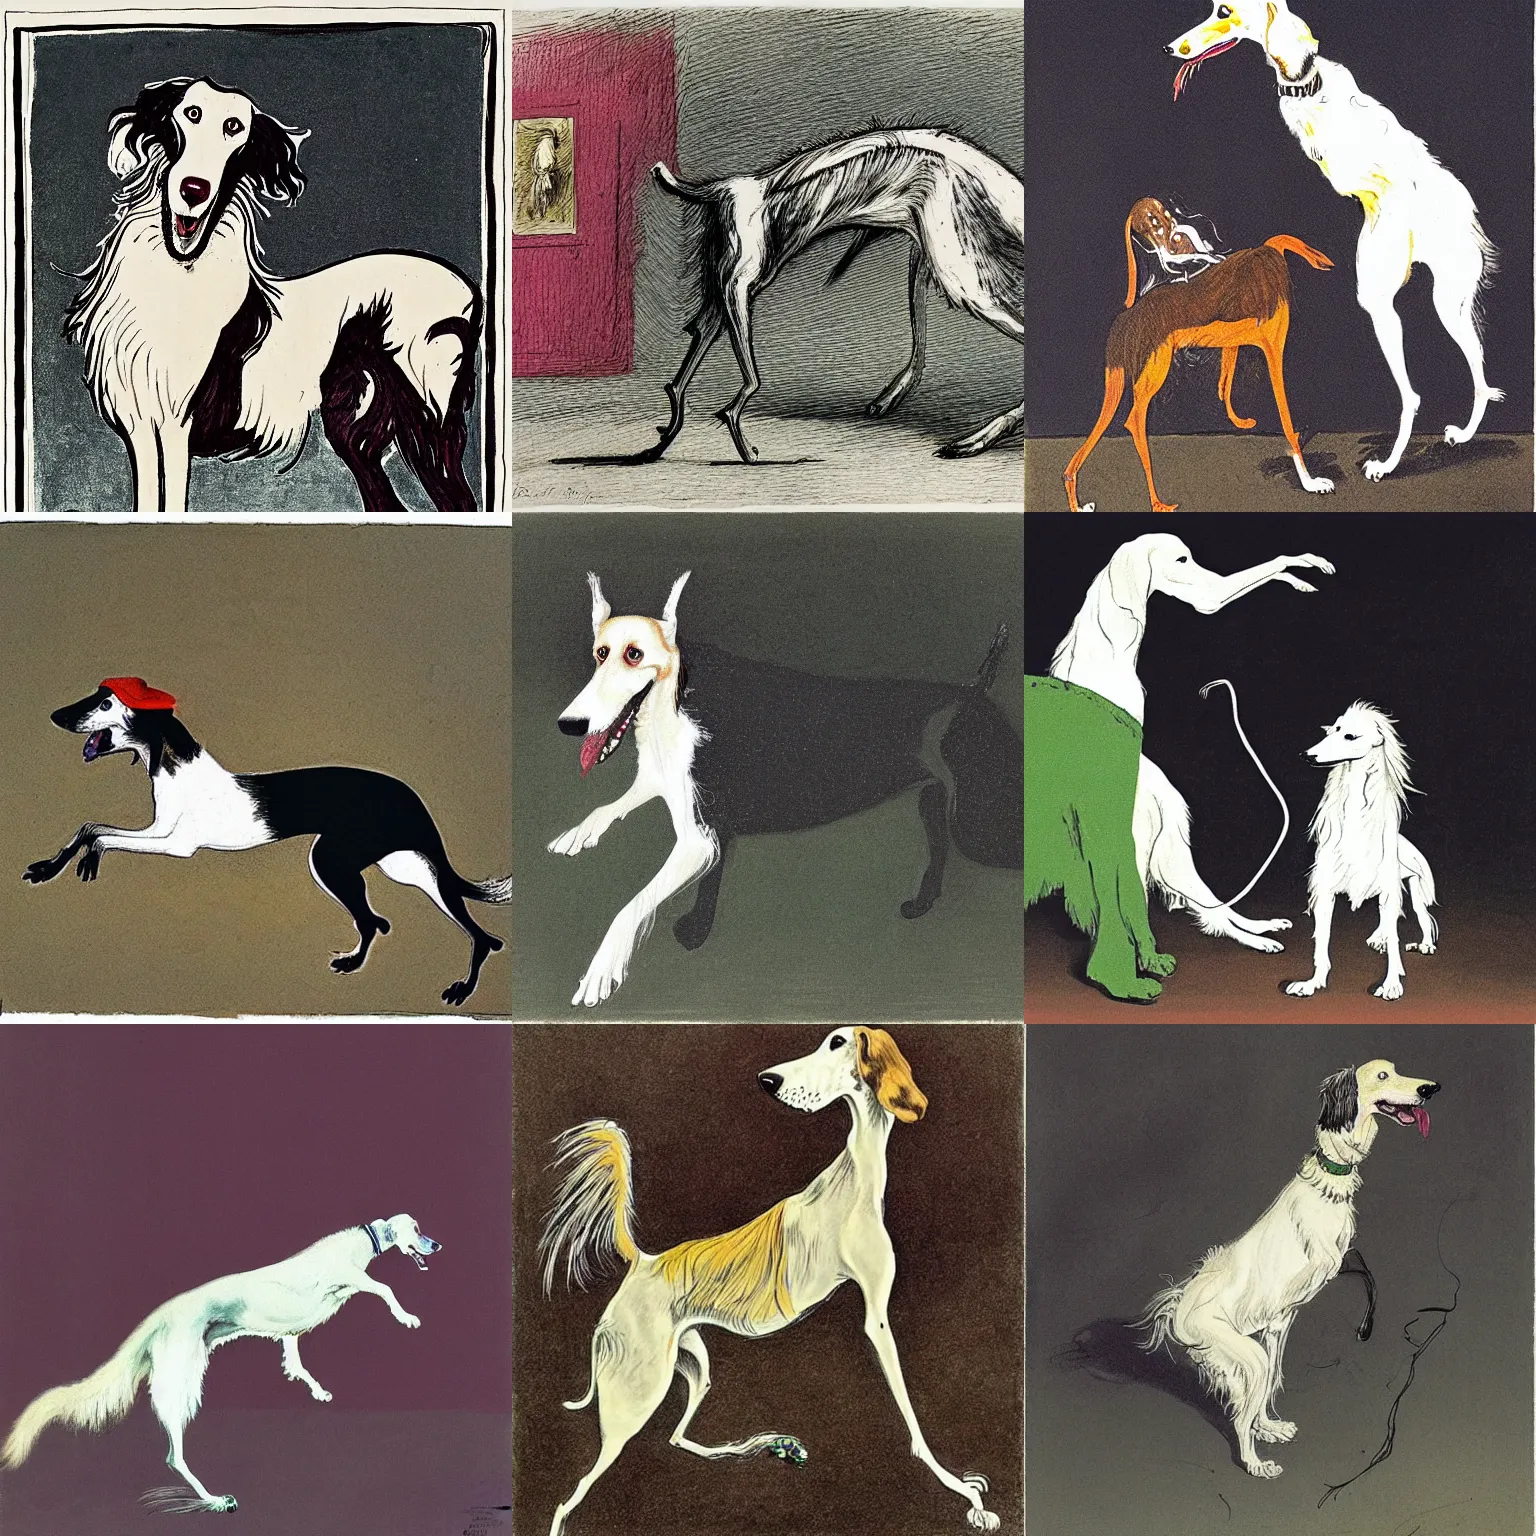 Prompt: An illustration of a Borzoi dog, by Ralph Steadman, Francis Bacon, Hunter S Thompson